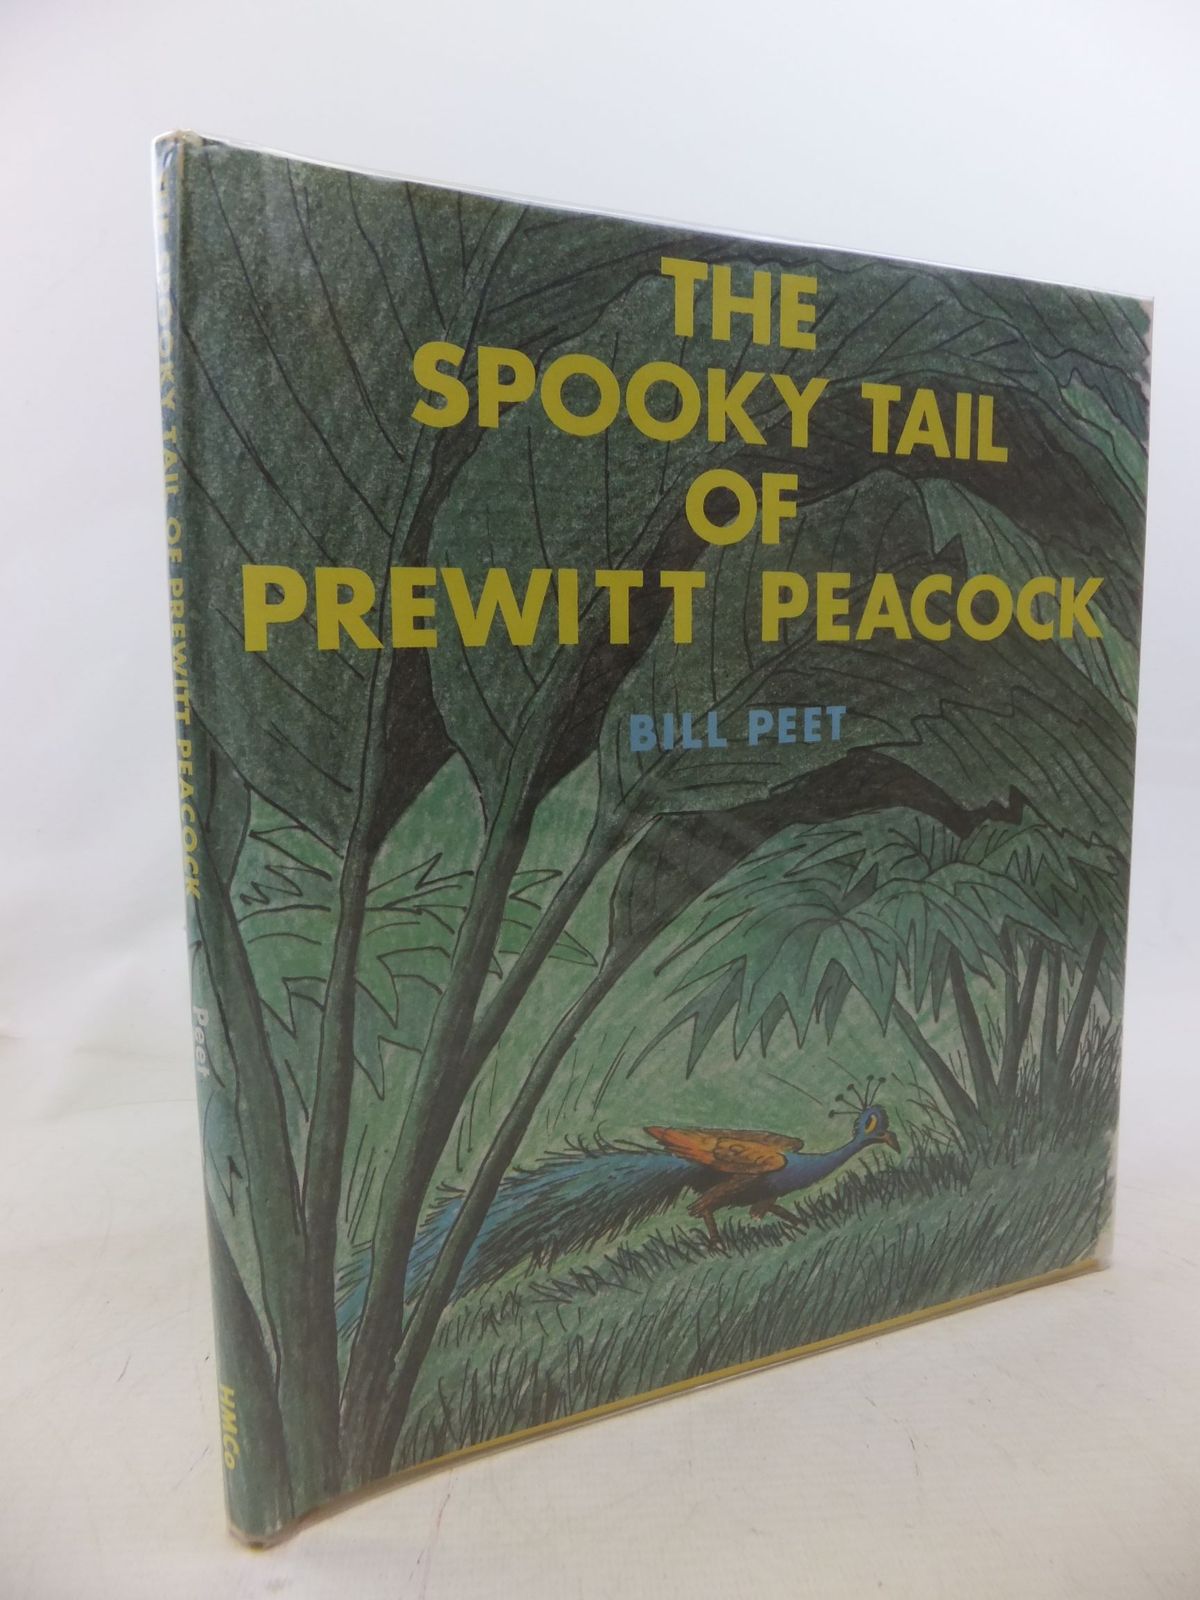 Photo of THE SPOOKY TAIL OF PREWITT PEACOCK written by Peet, Bill illustrated by Peet, Bill published by Andre Deutsch (STOCK CODE: 1711642)  for sale by Stella & Rose's Books